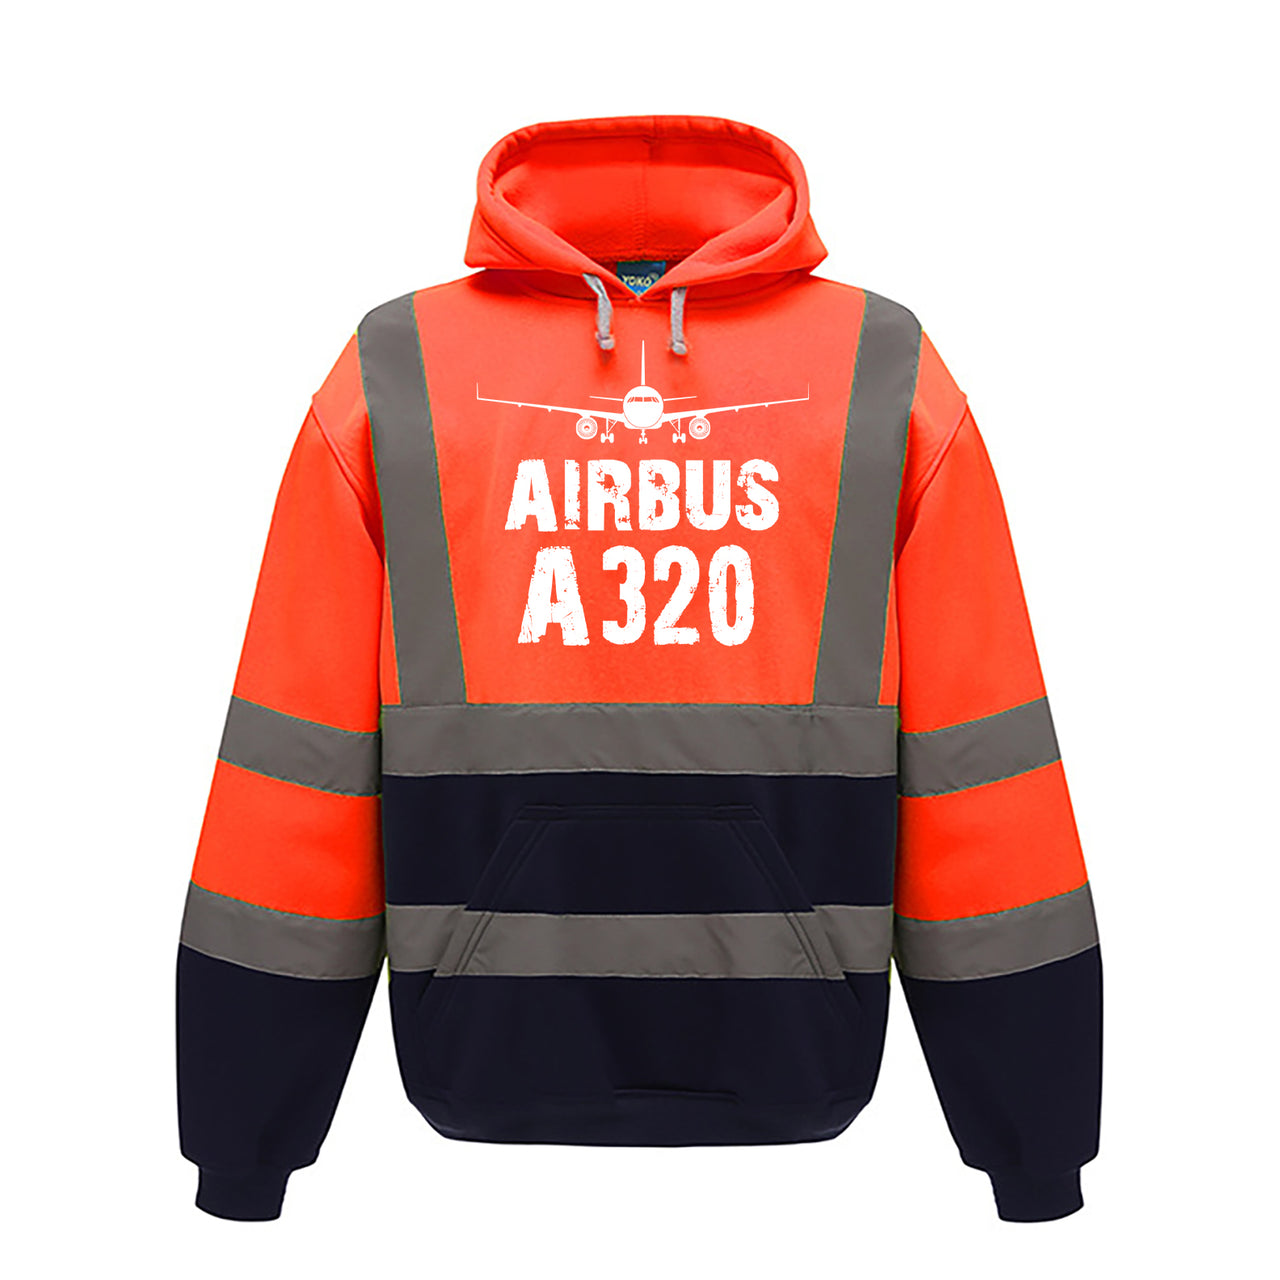 Airbus A320 & Plane Designed Reflective Hoodies